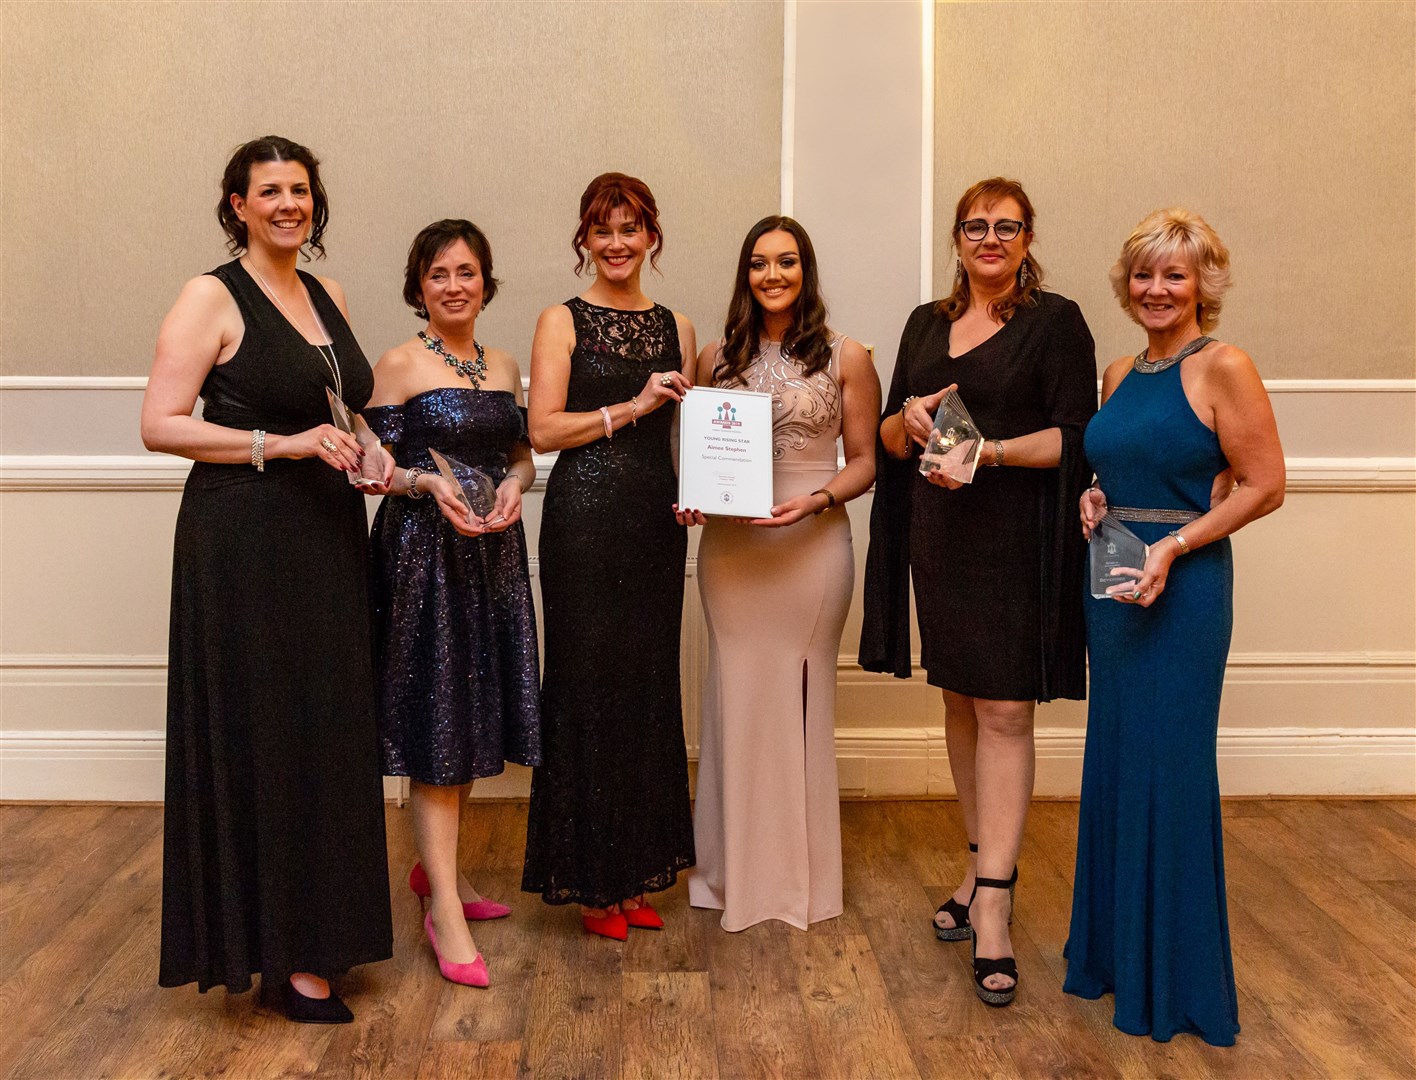 Celebrating at the Moray Business Women Awards are (from left) Sheila Hull, Joan Johnston, Nicky Marr, Aimee Stephen, Amanda Nasser and Susan Beveridge. Picture: Lindsay Robertson Photography.